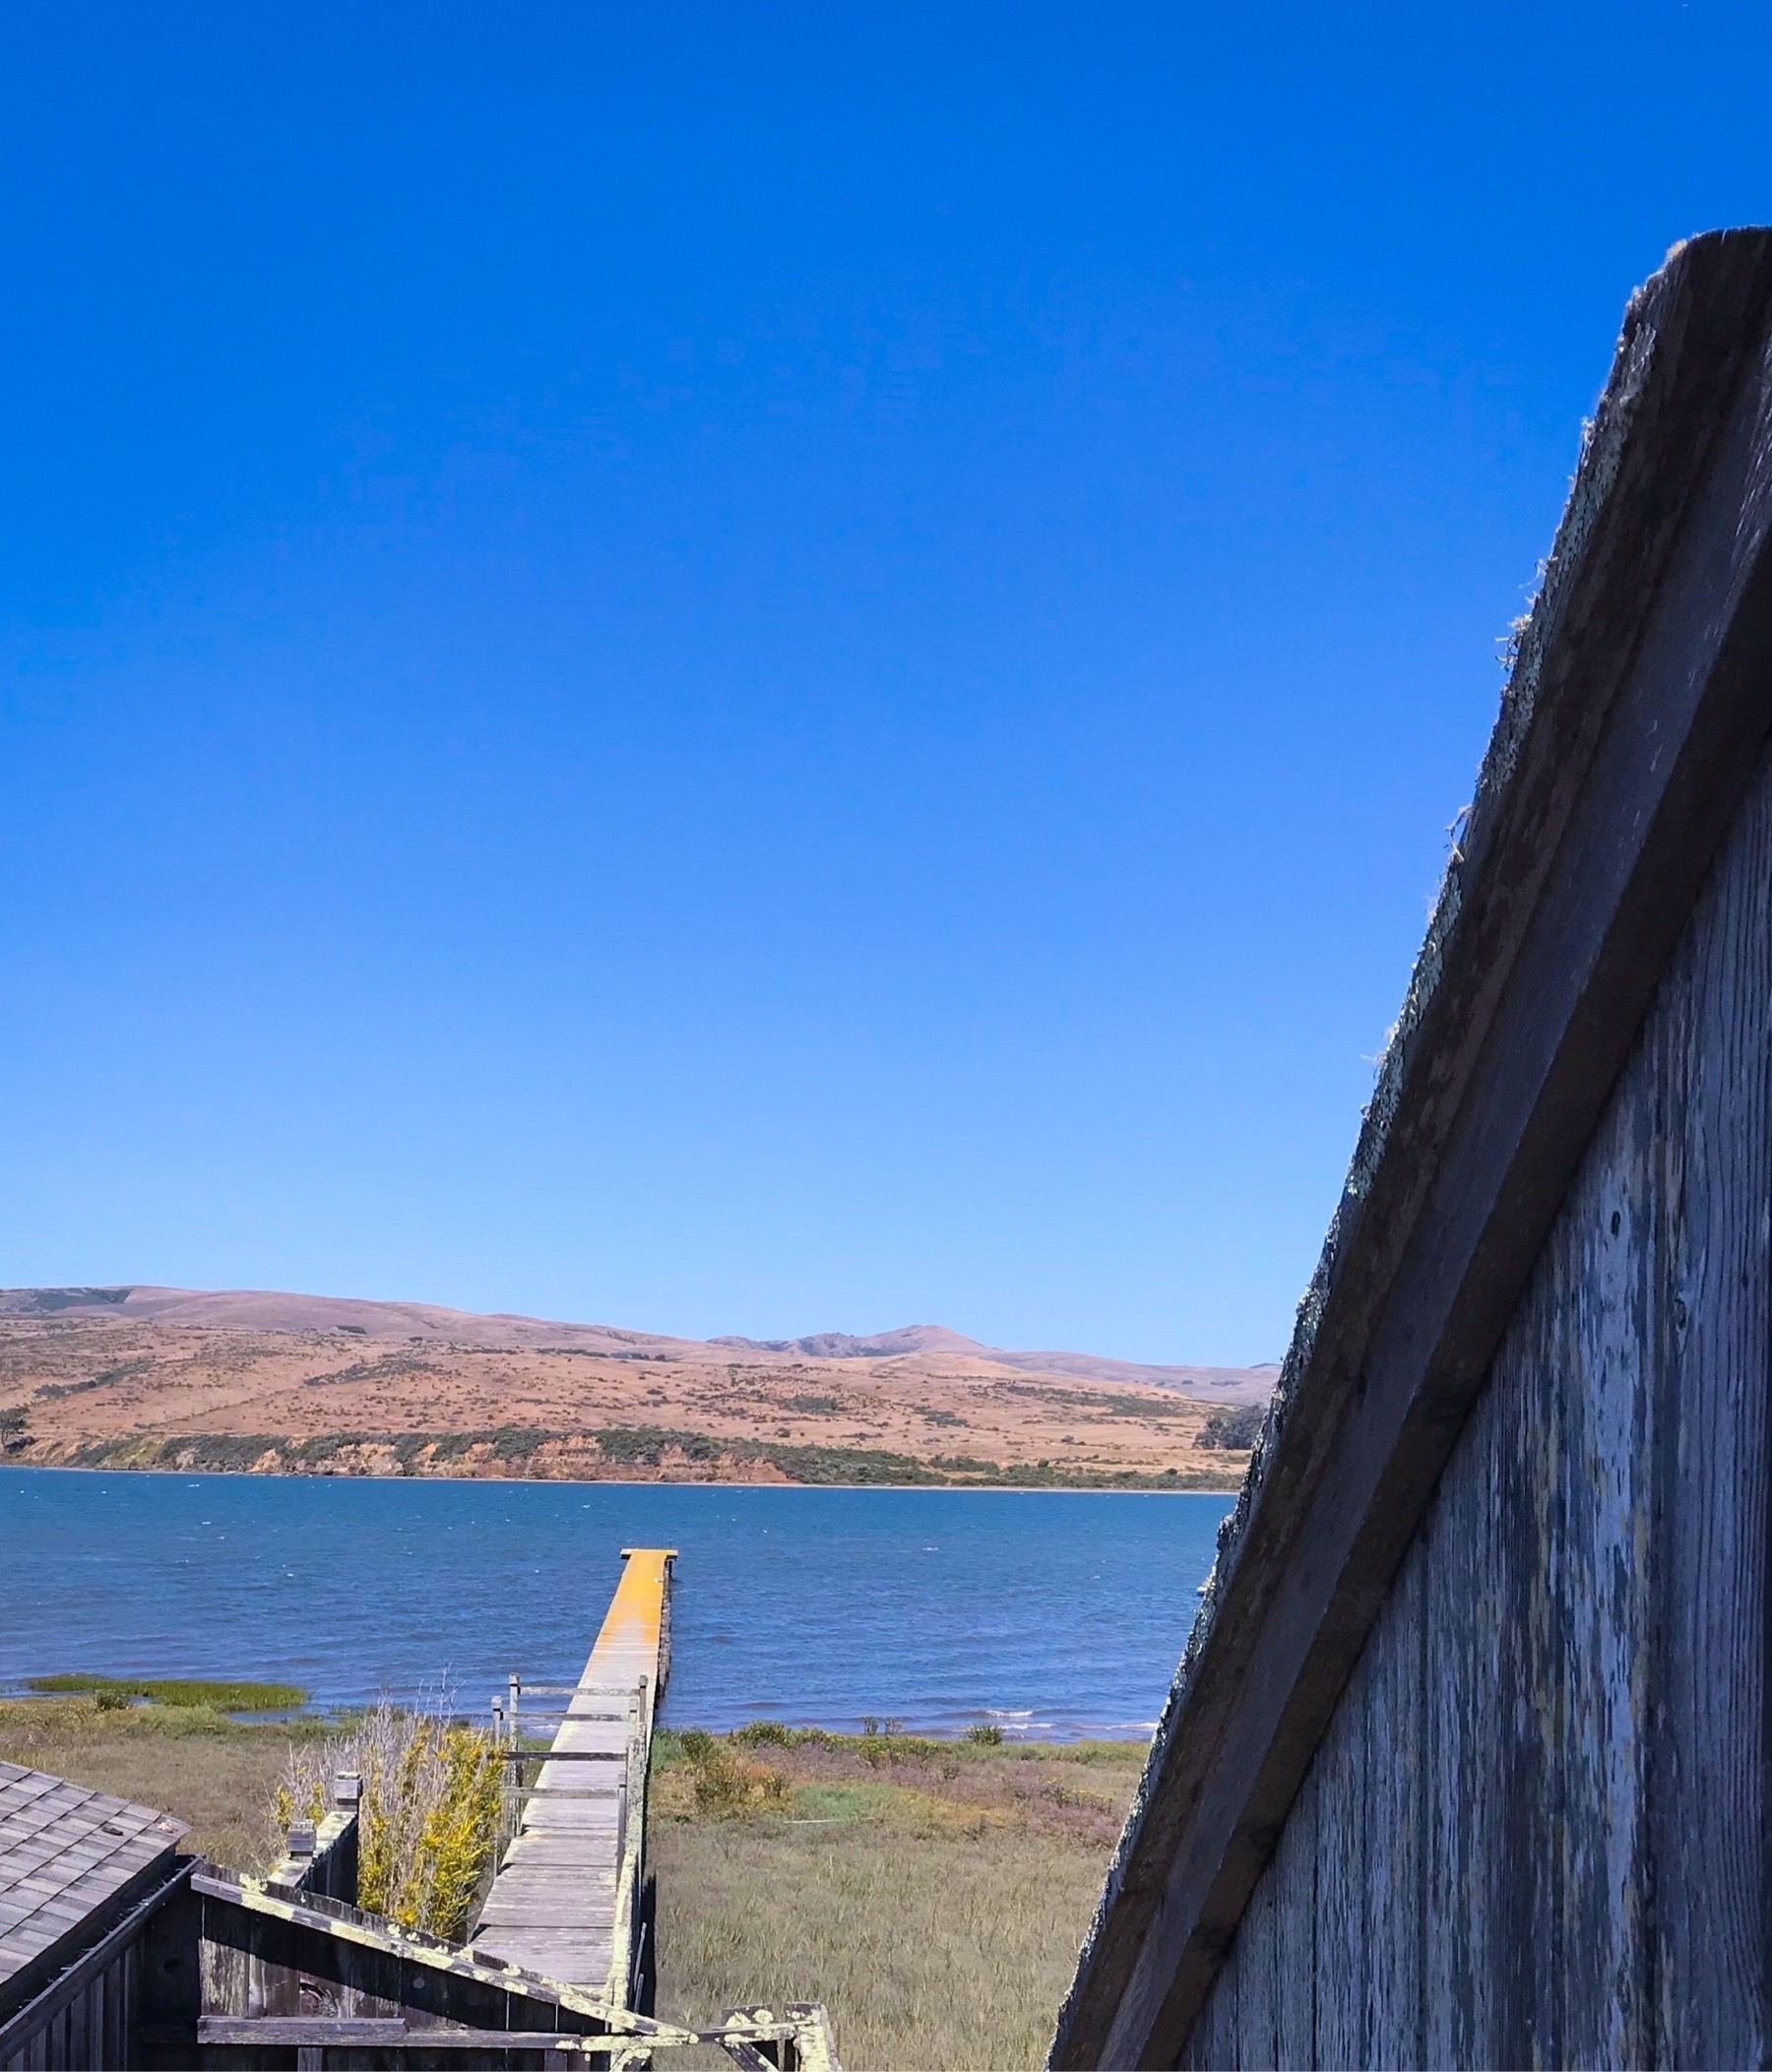 A wooden pier jutting out into Tomales Bay from a house in Inverness, California